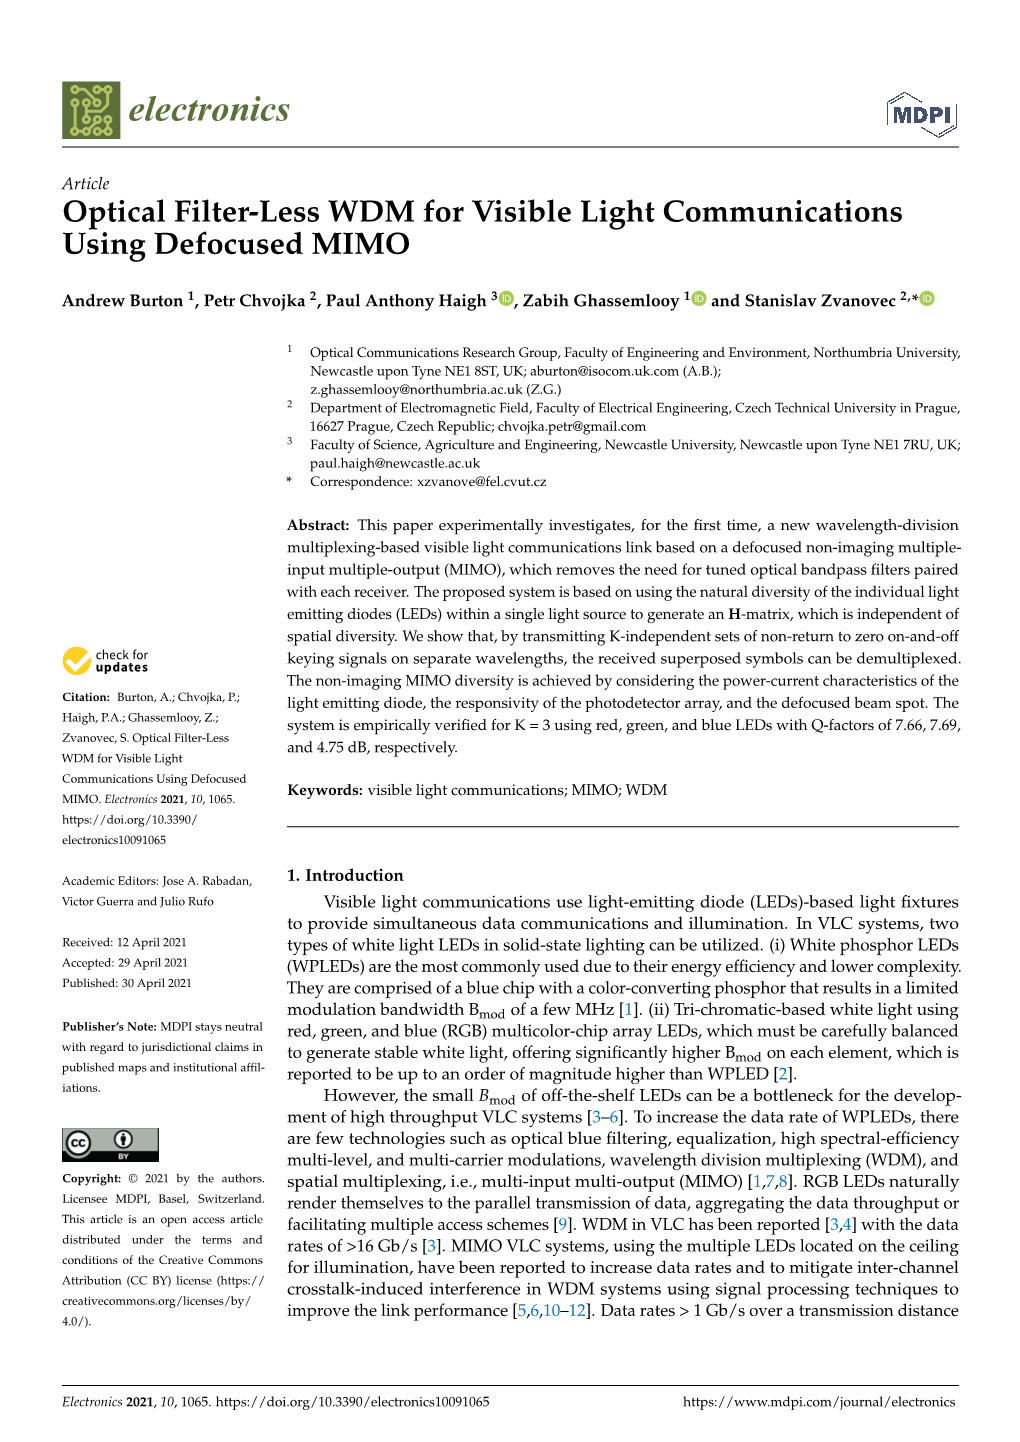 Optical Filter-Less WDM for Visible Light Communications Using Defocused MIMO